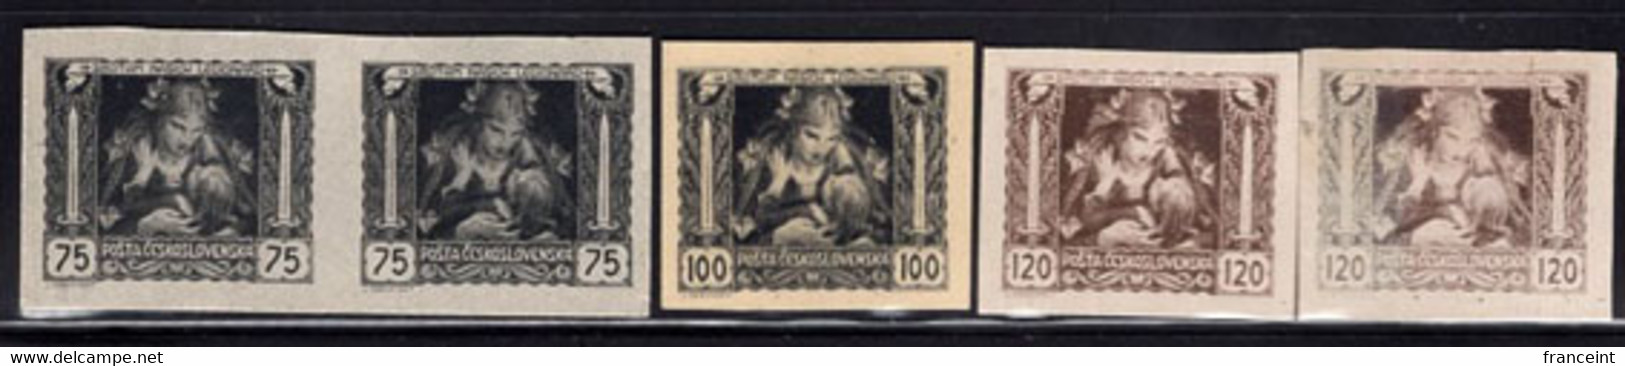 CZECHOSLOVAKIA(1919) Mother And Child. Set Of 5 Imperforate Proofs Printed On Card Stock. Scott Nos B127-9. - Proeven & Herdrukken